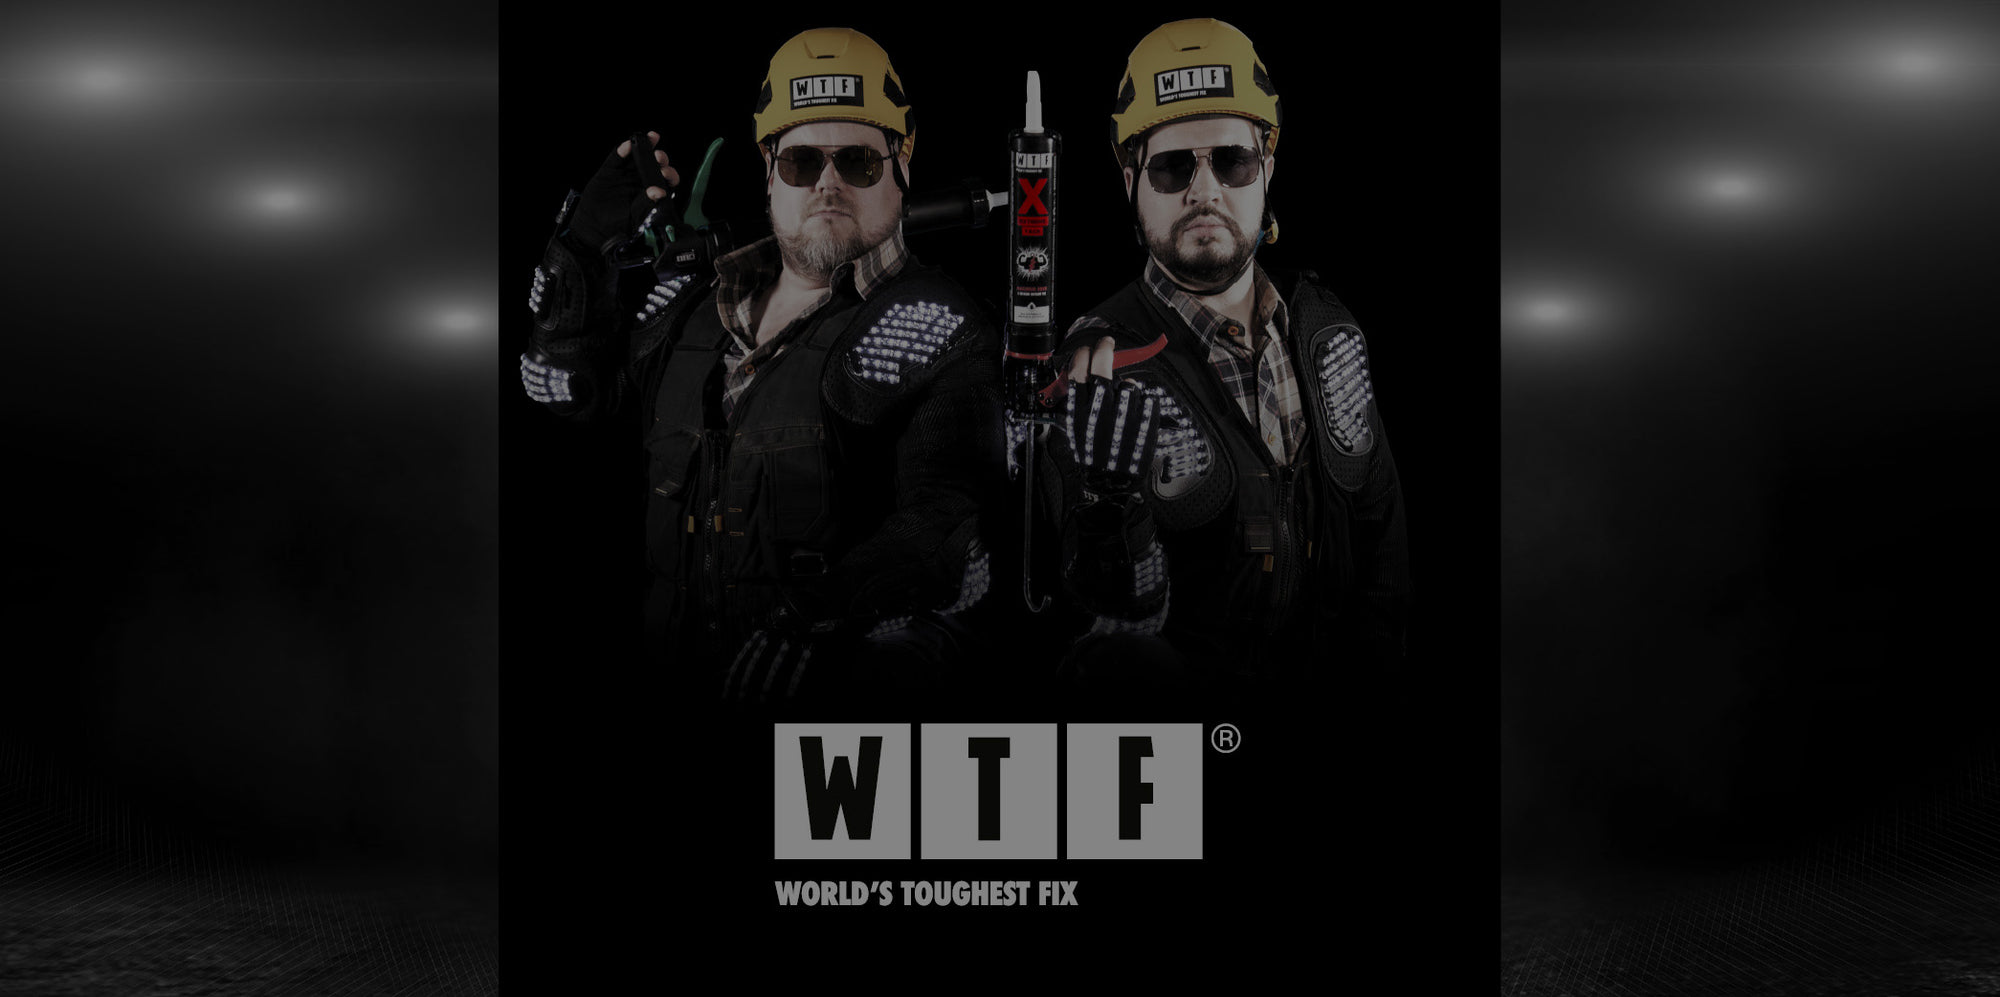 WTF® HAS WON SILVER IN THE MARKETING COMPETITION!